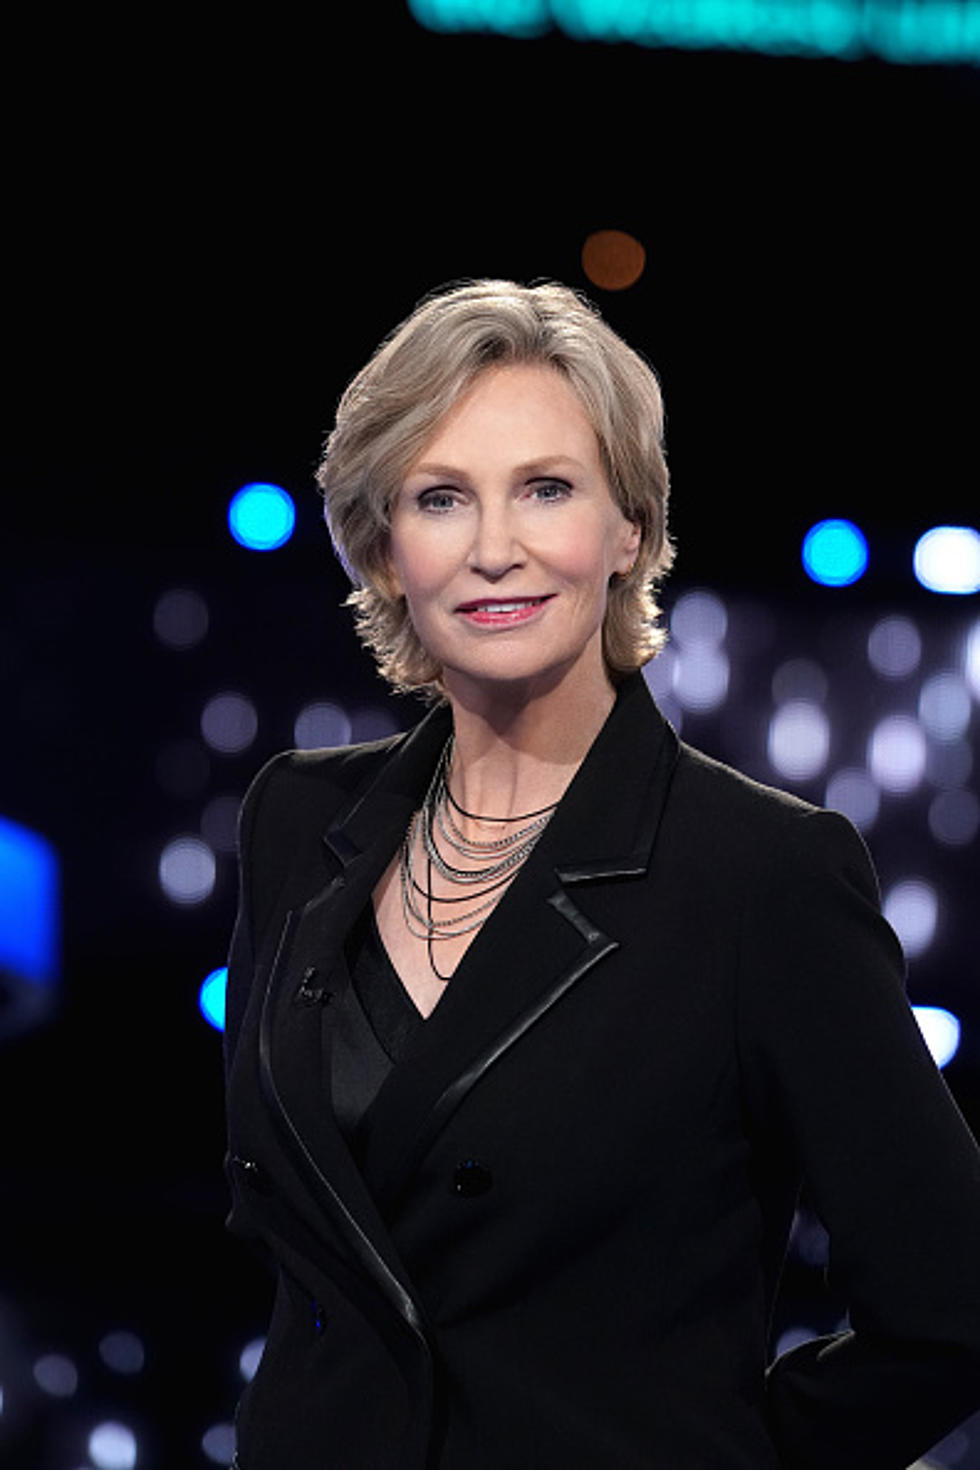 Illinois Hires Jane Lynch For New Tourism Campaign